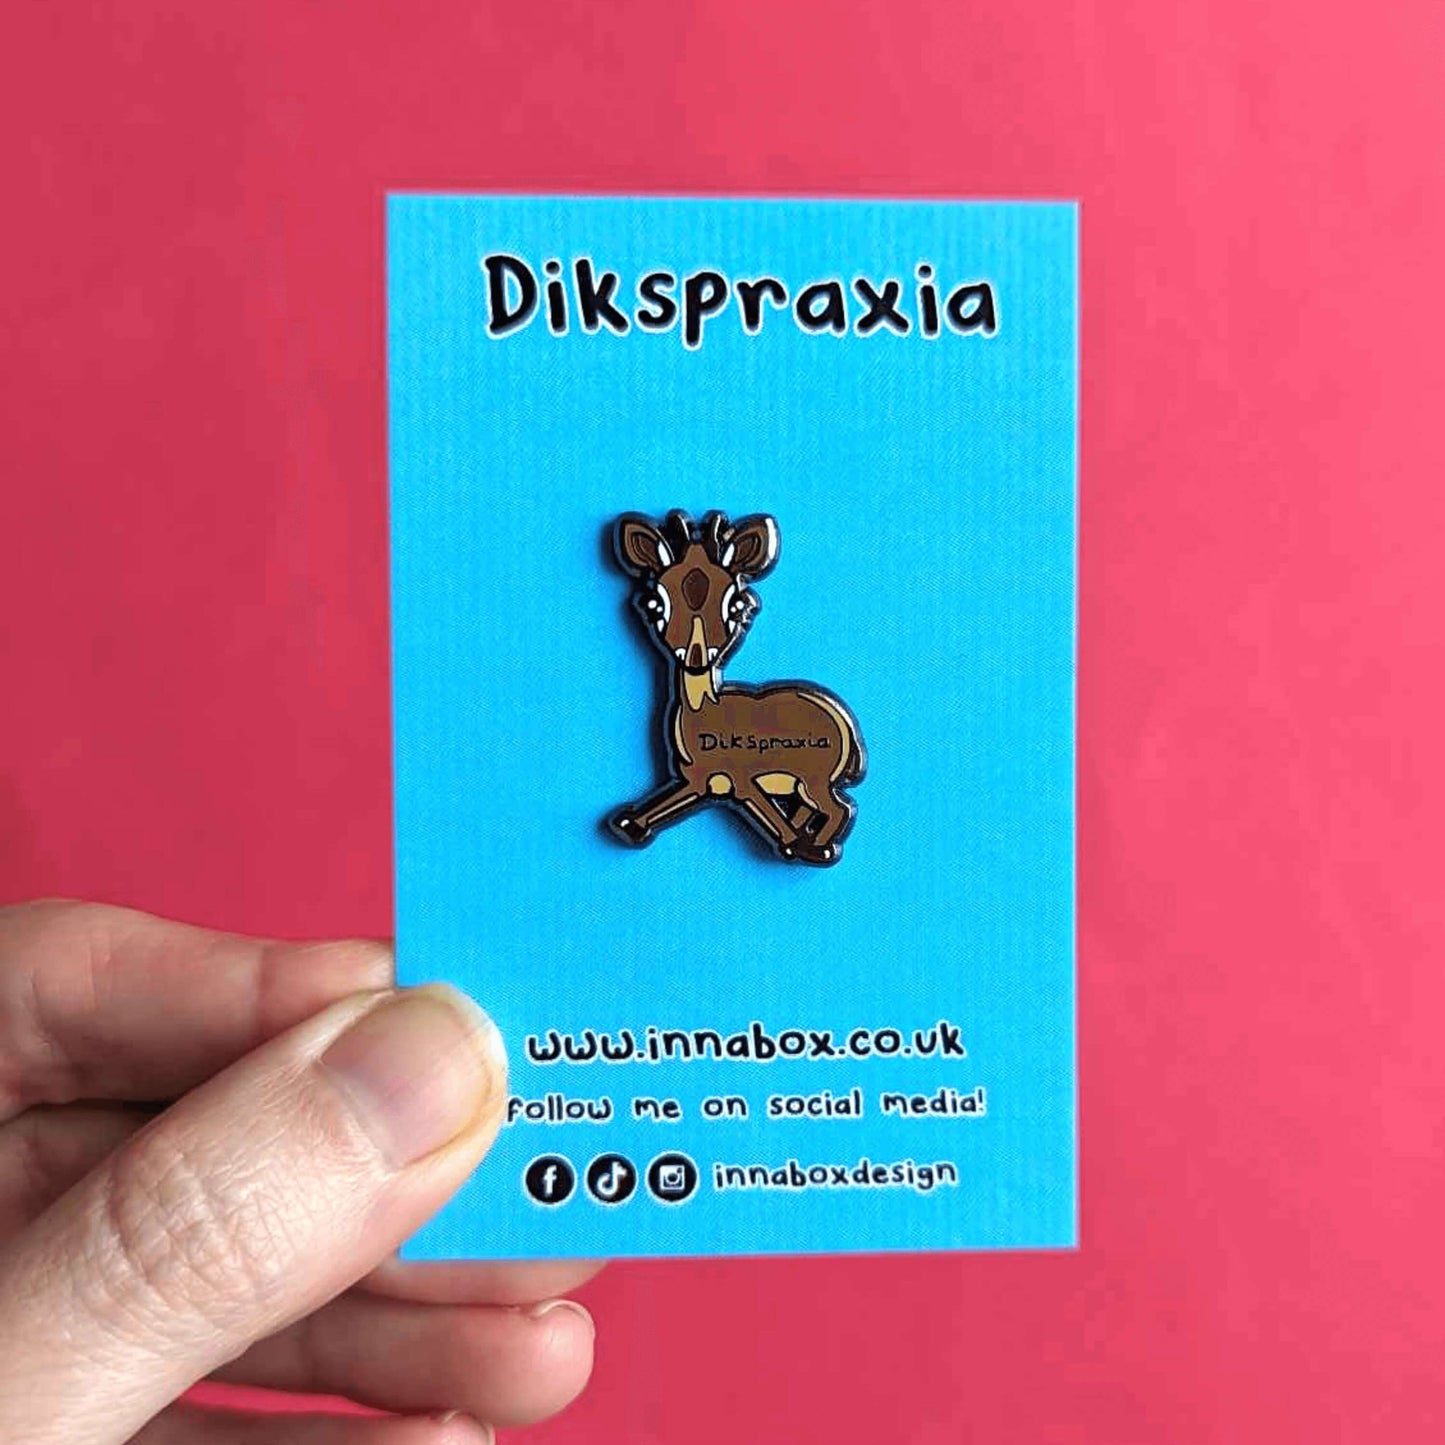 The Dikspraxia Enamel Pin - Dyspraxia on blue backing card with top text reading 'dikspraxia' and bottom text of the innabox website and social media handles being held up over a red background. The brown dik dik antelope shaped enamel pin has its two front legs splayed chaotically with black text reading 'dikspraxia' across its middle. The design is raising awareness for dyspraxia and neurodivergence.